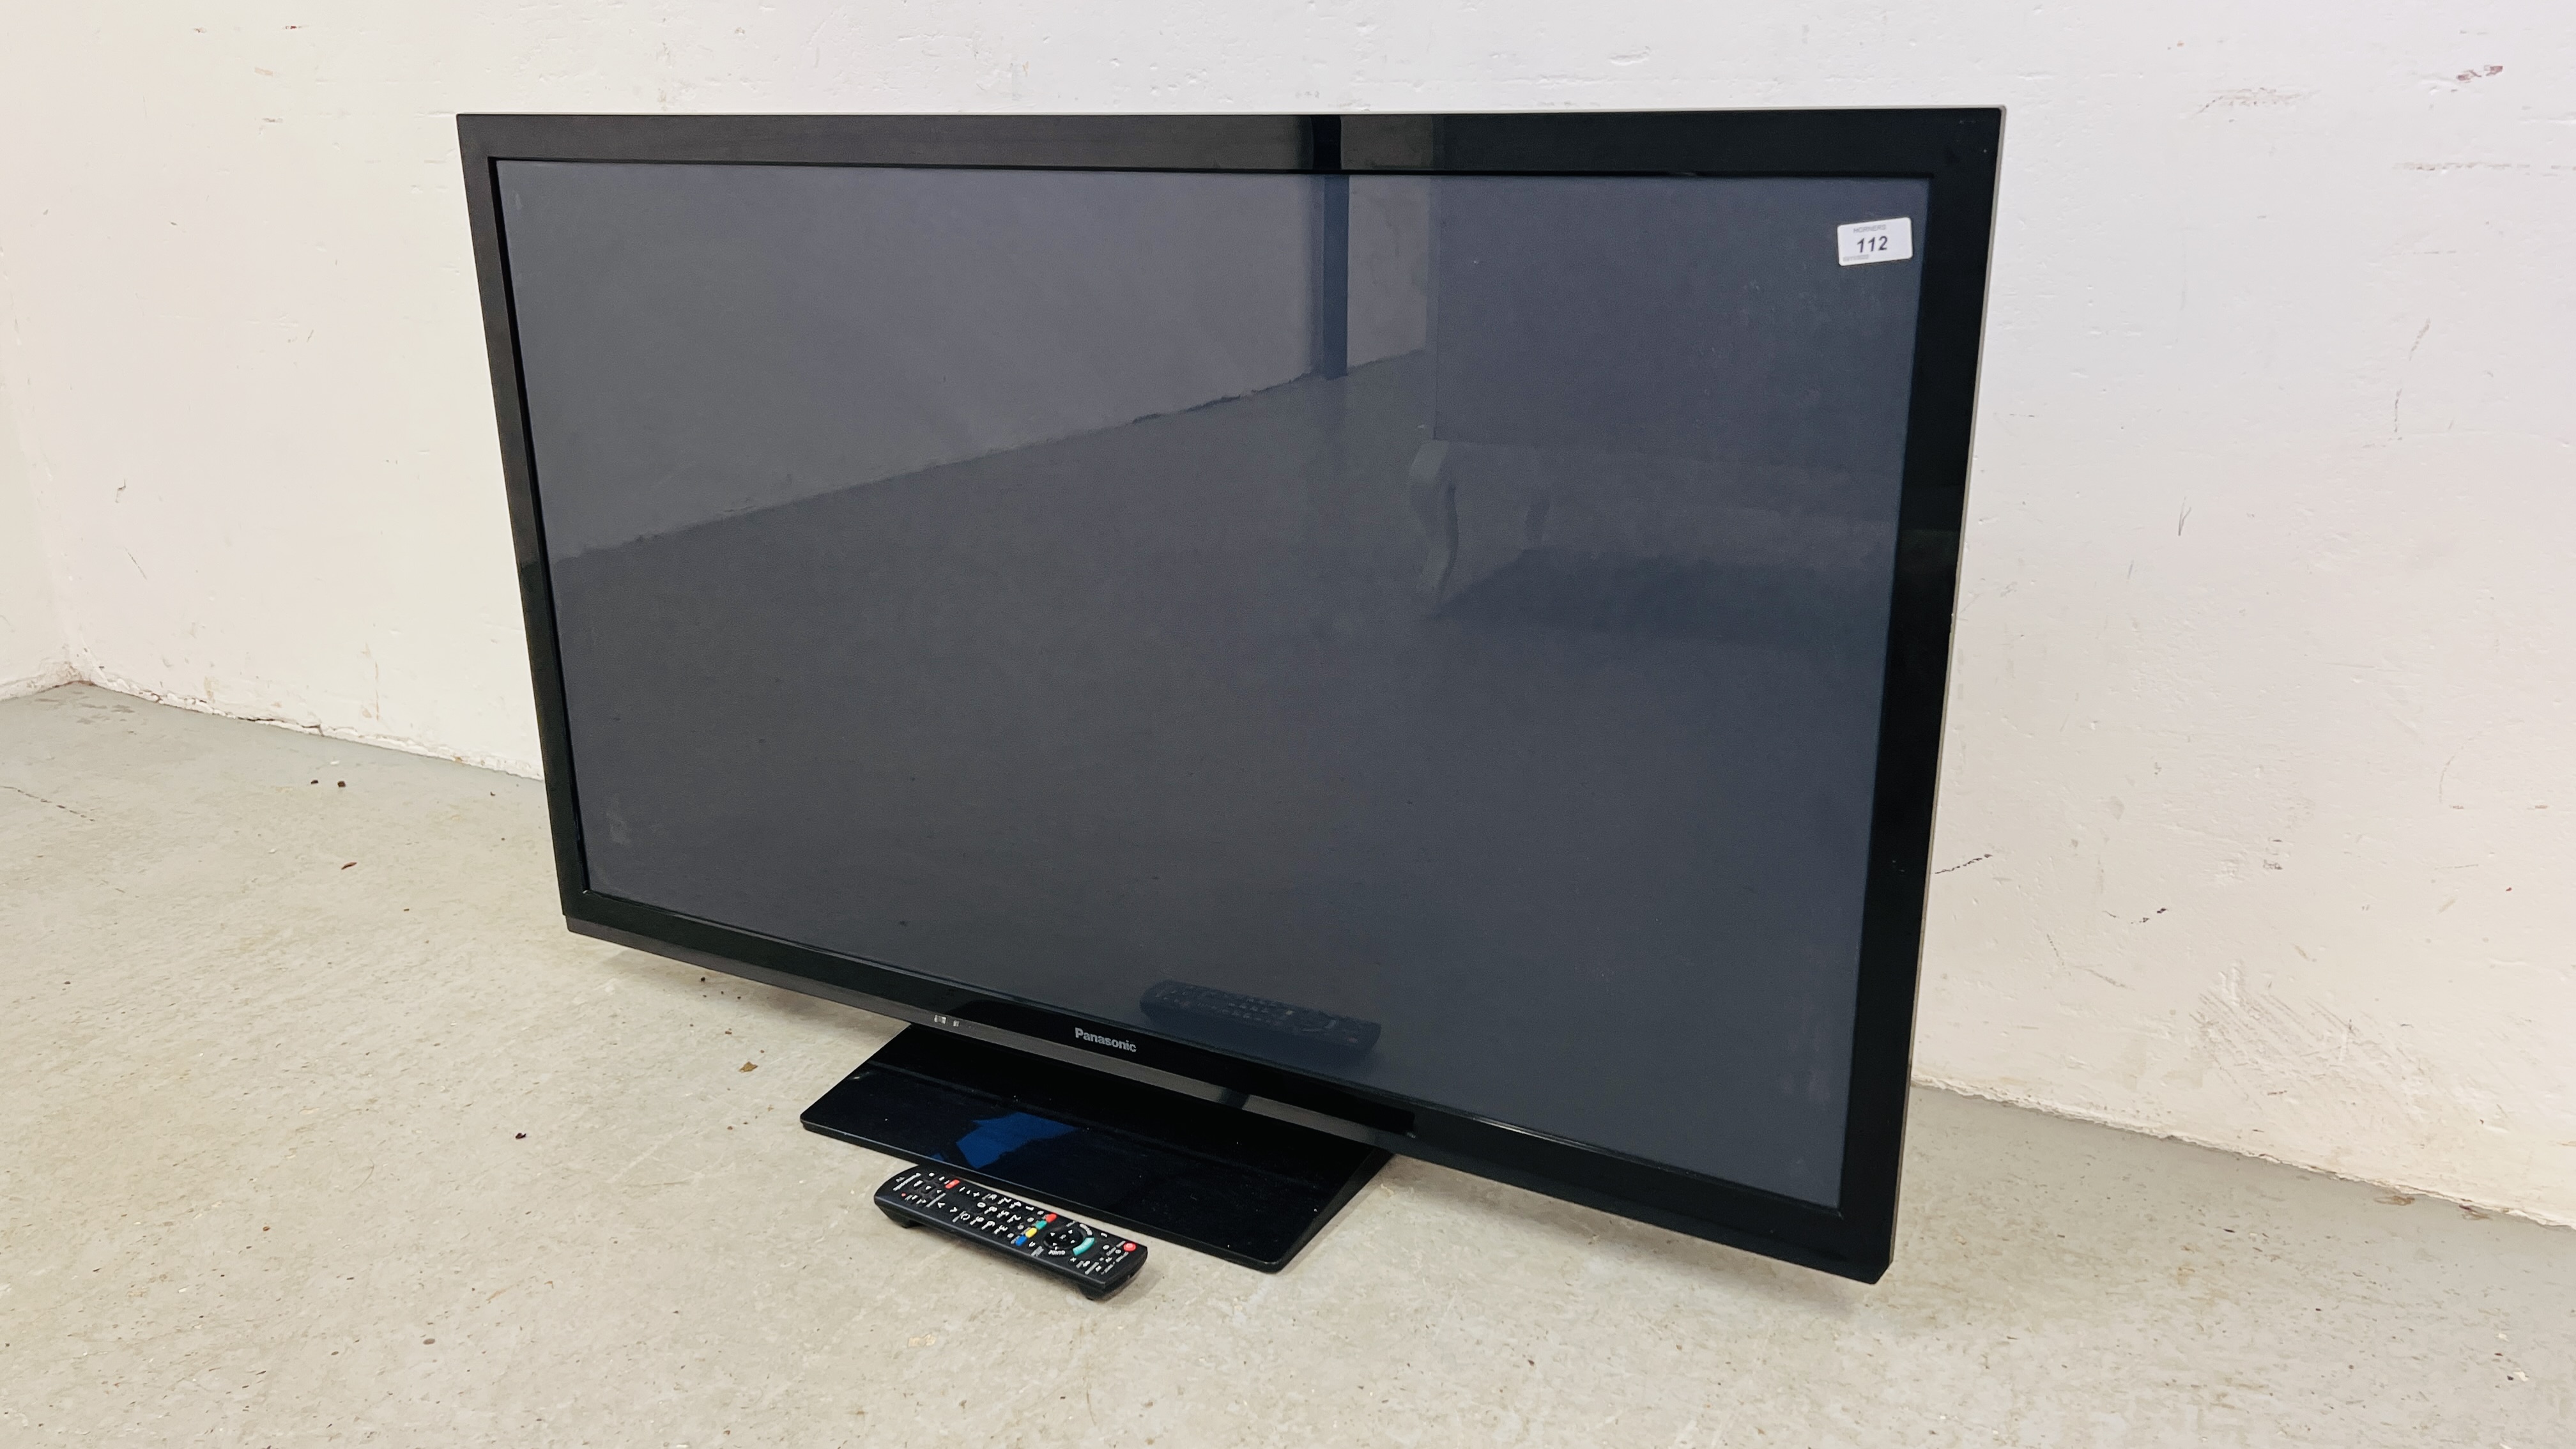 A PANASONIC 50 INCH FLAT SCREEN TELEVISION MODEL No. TX-P50X60B COMPLETE WITH REMOTE - SOLD AS SEEN.